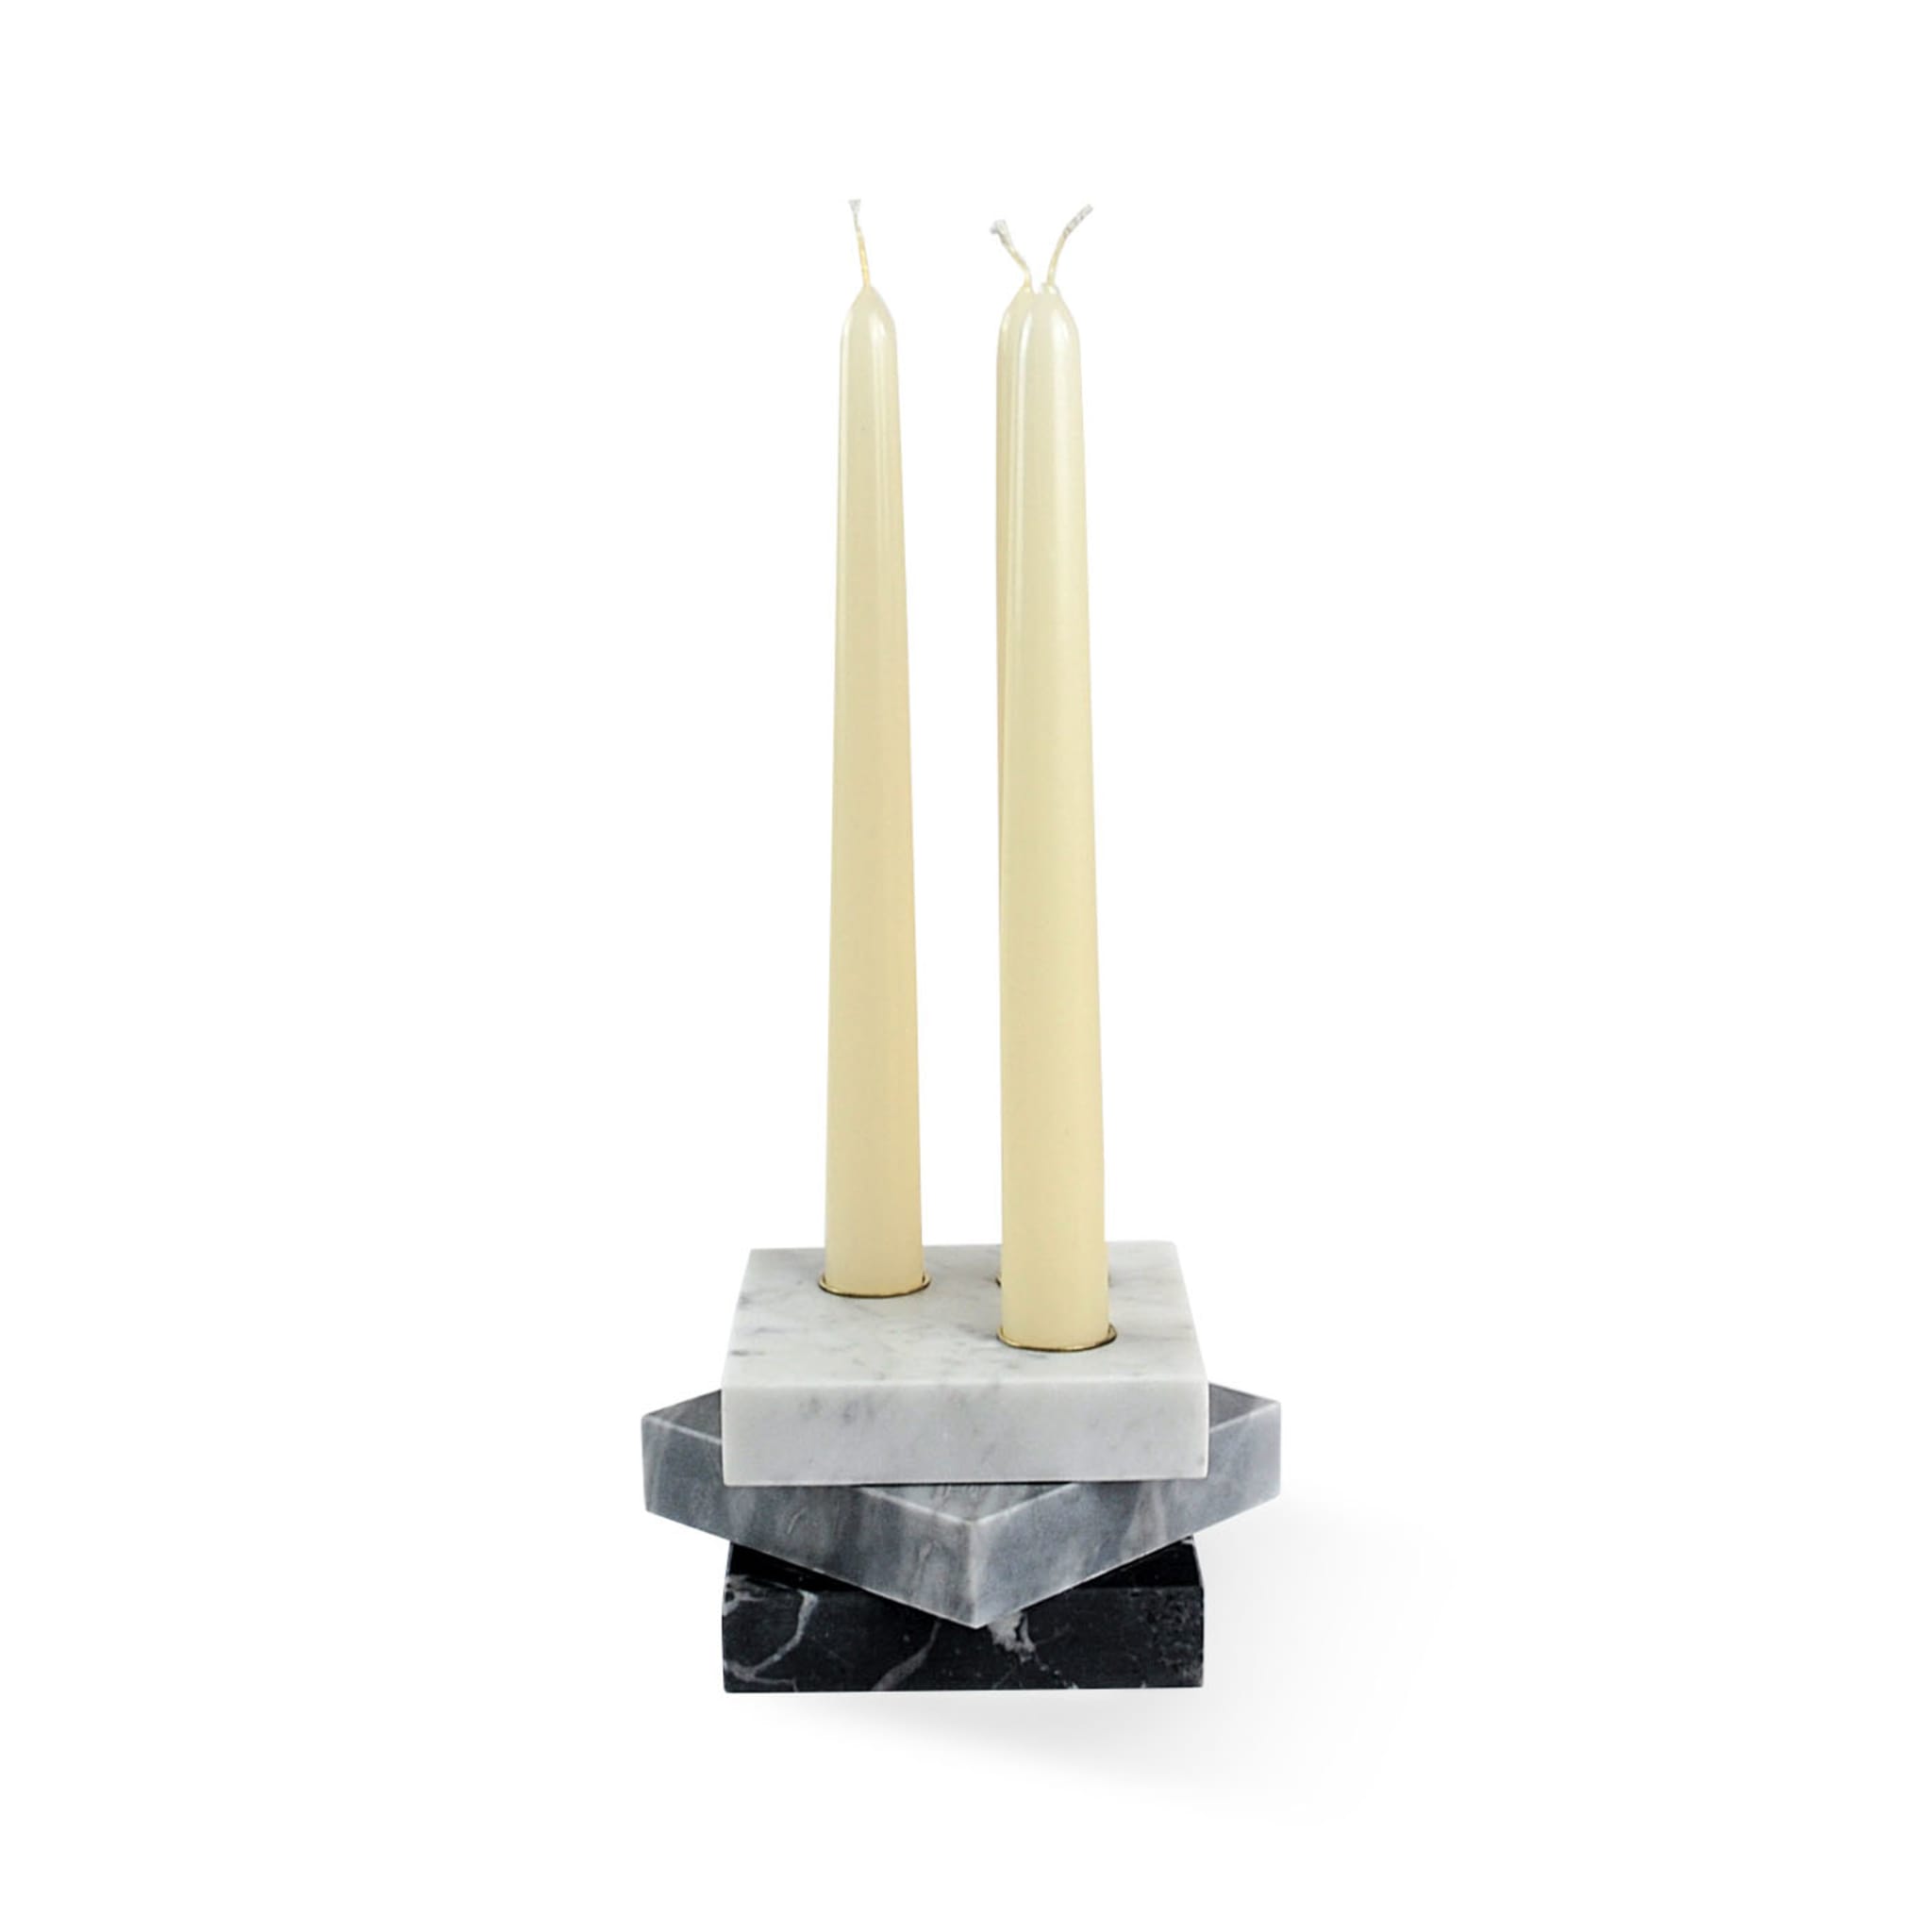 Squared 3 Levels Candle Holder - Alternative view 2